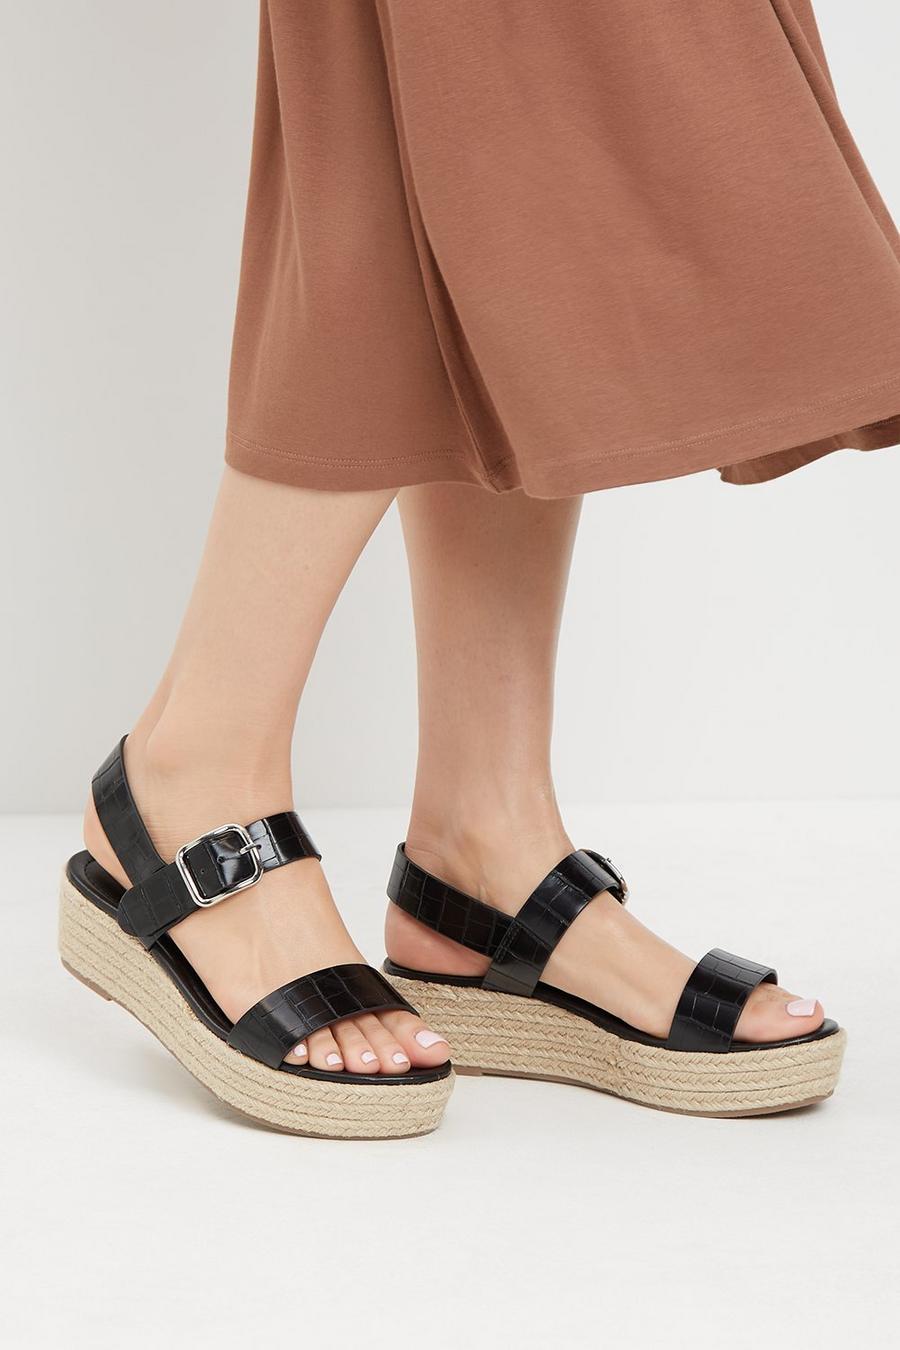 Reign Double Strap Wedges